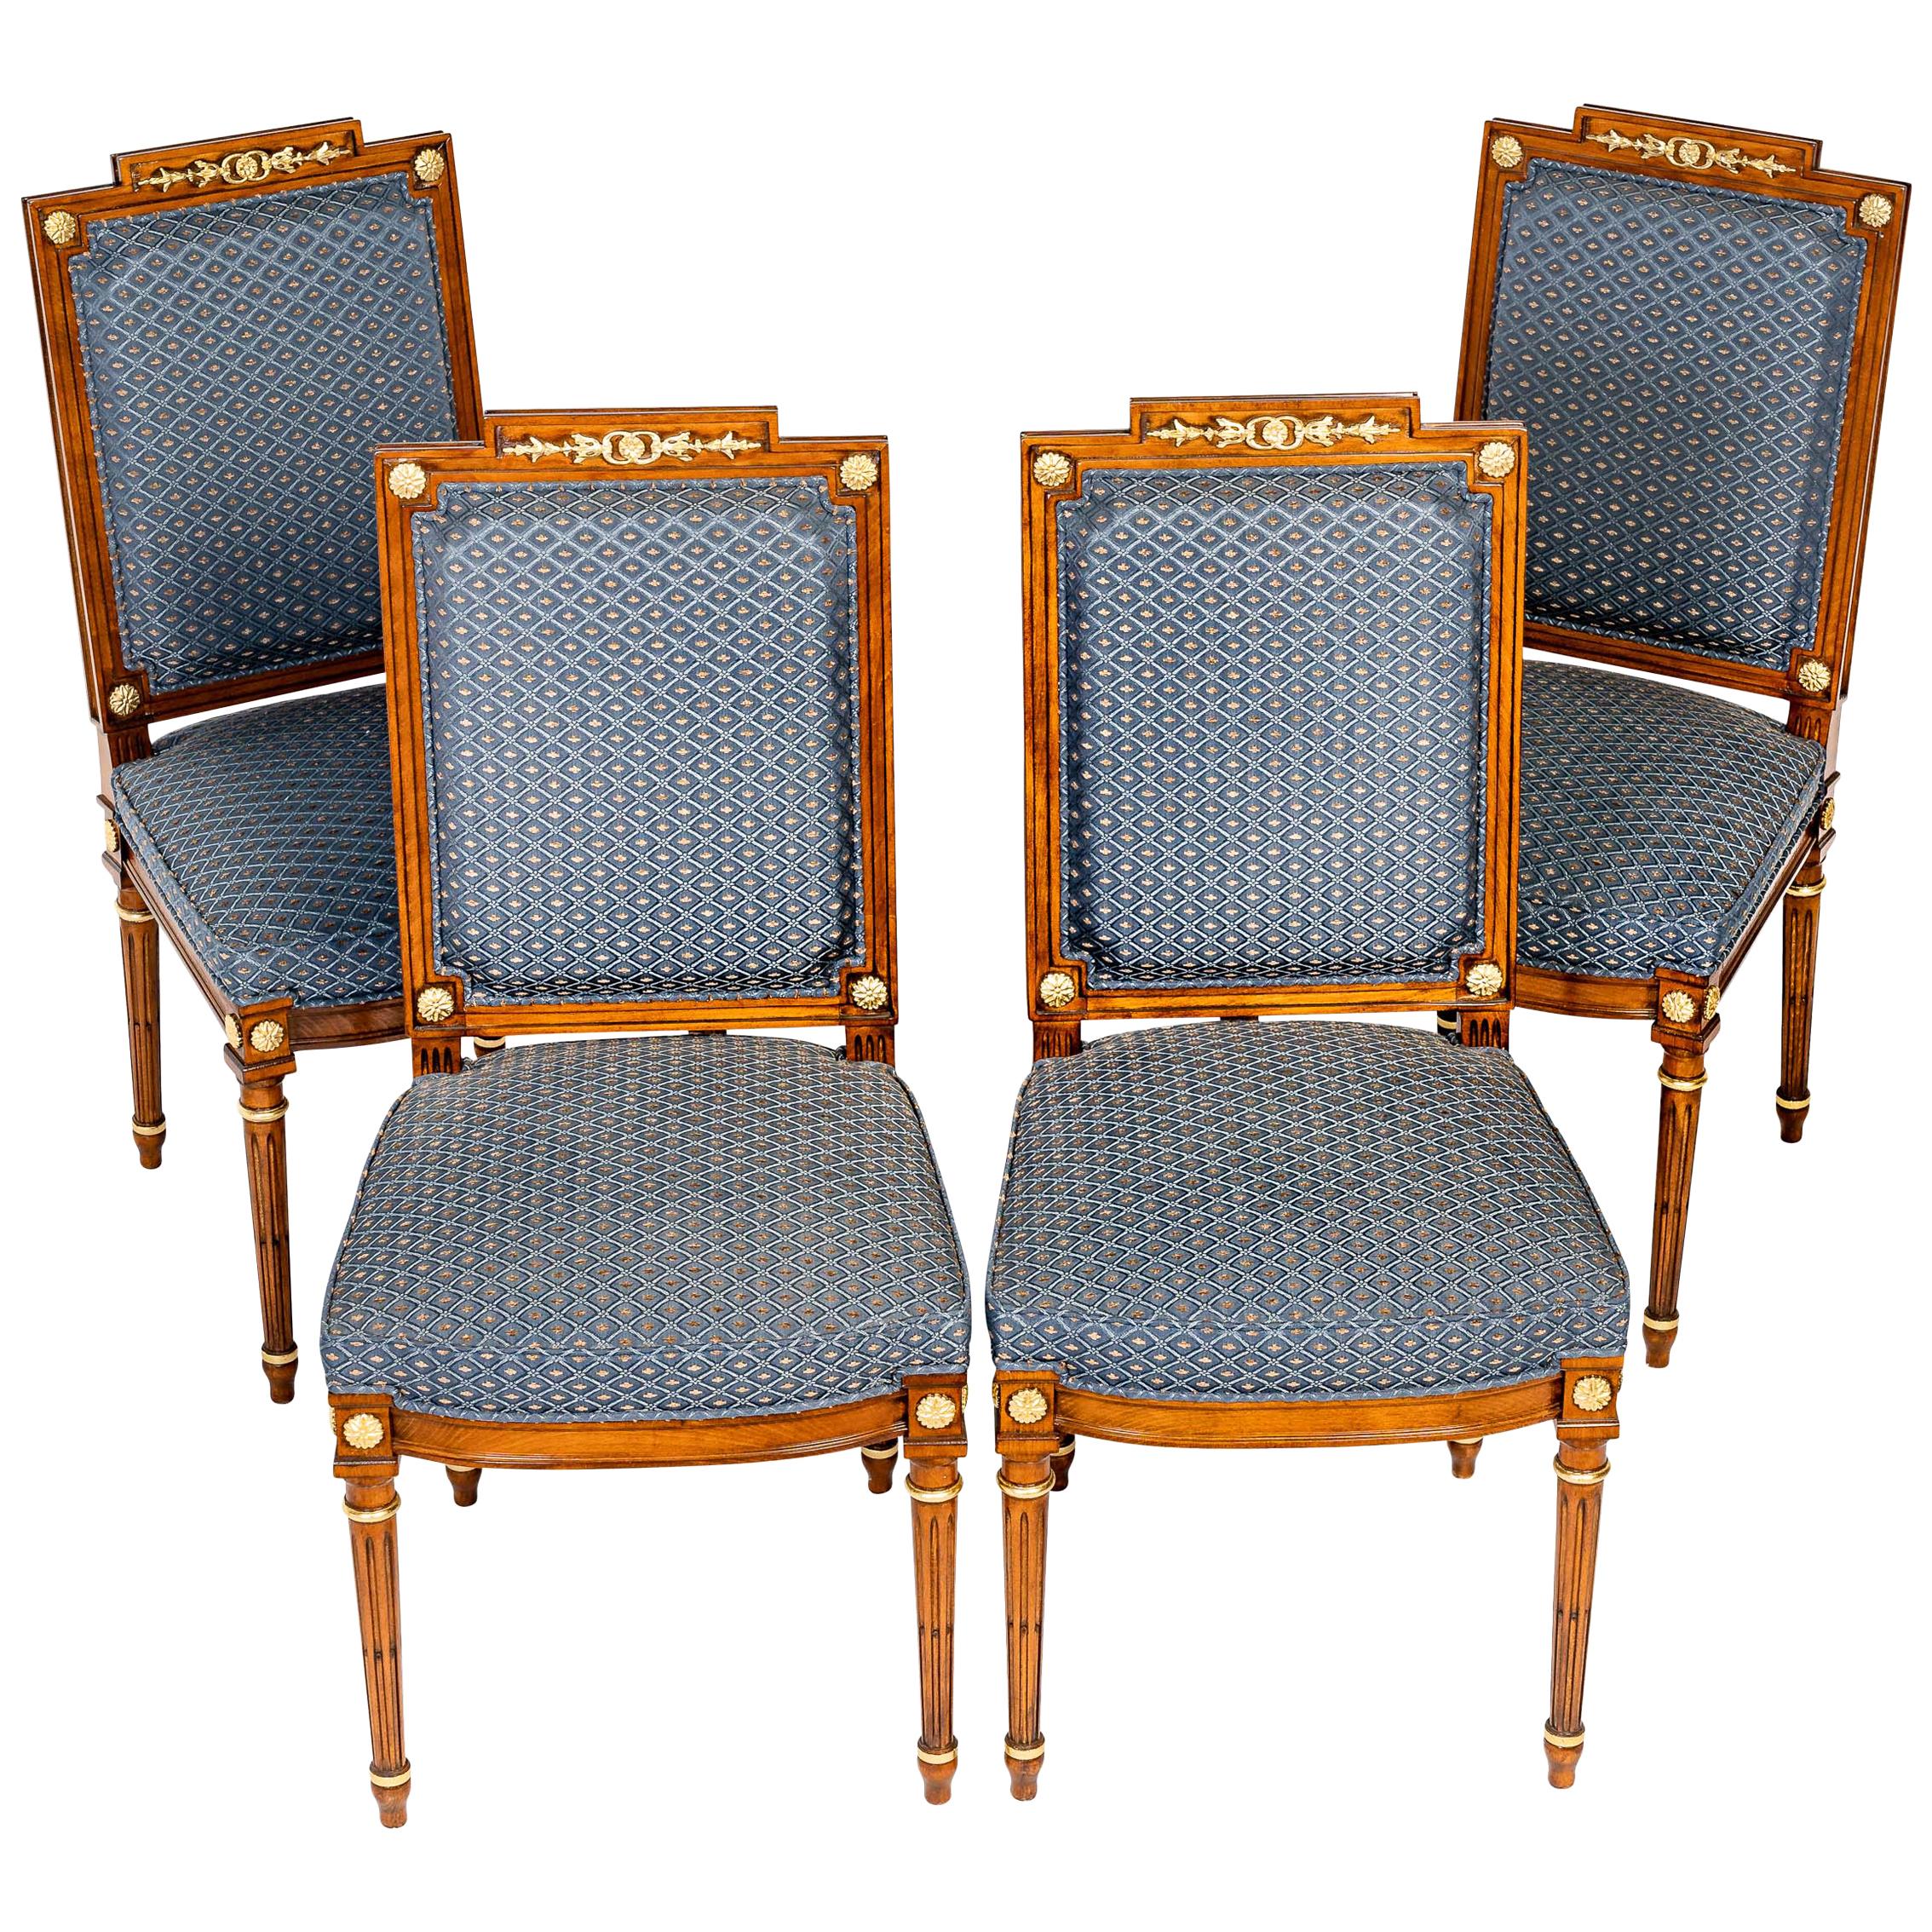 4 French 19th Century Louis XVI Style Cherry Dining Chairs without Armrest